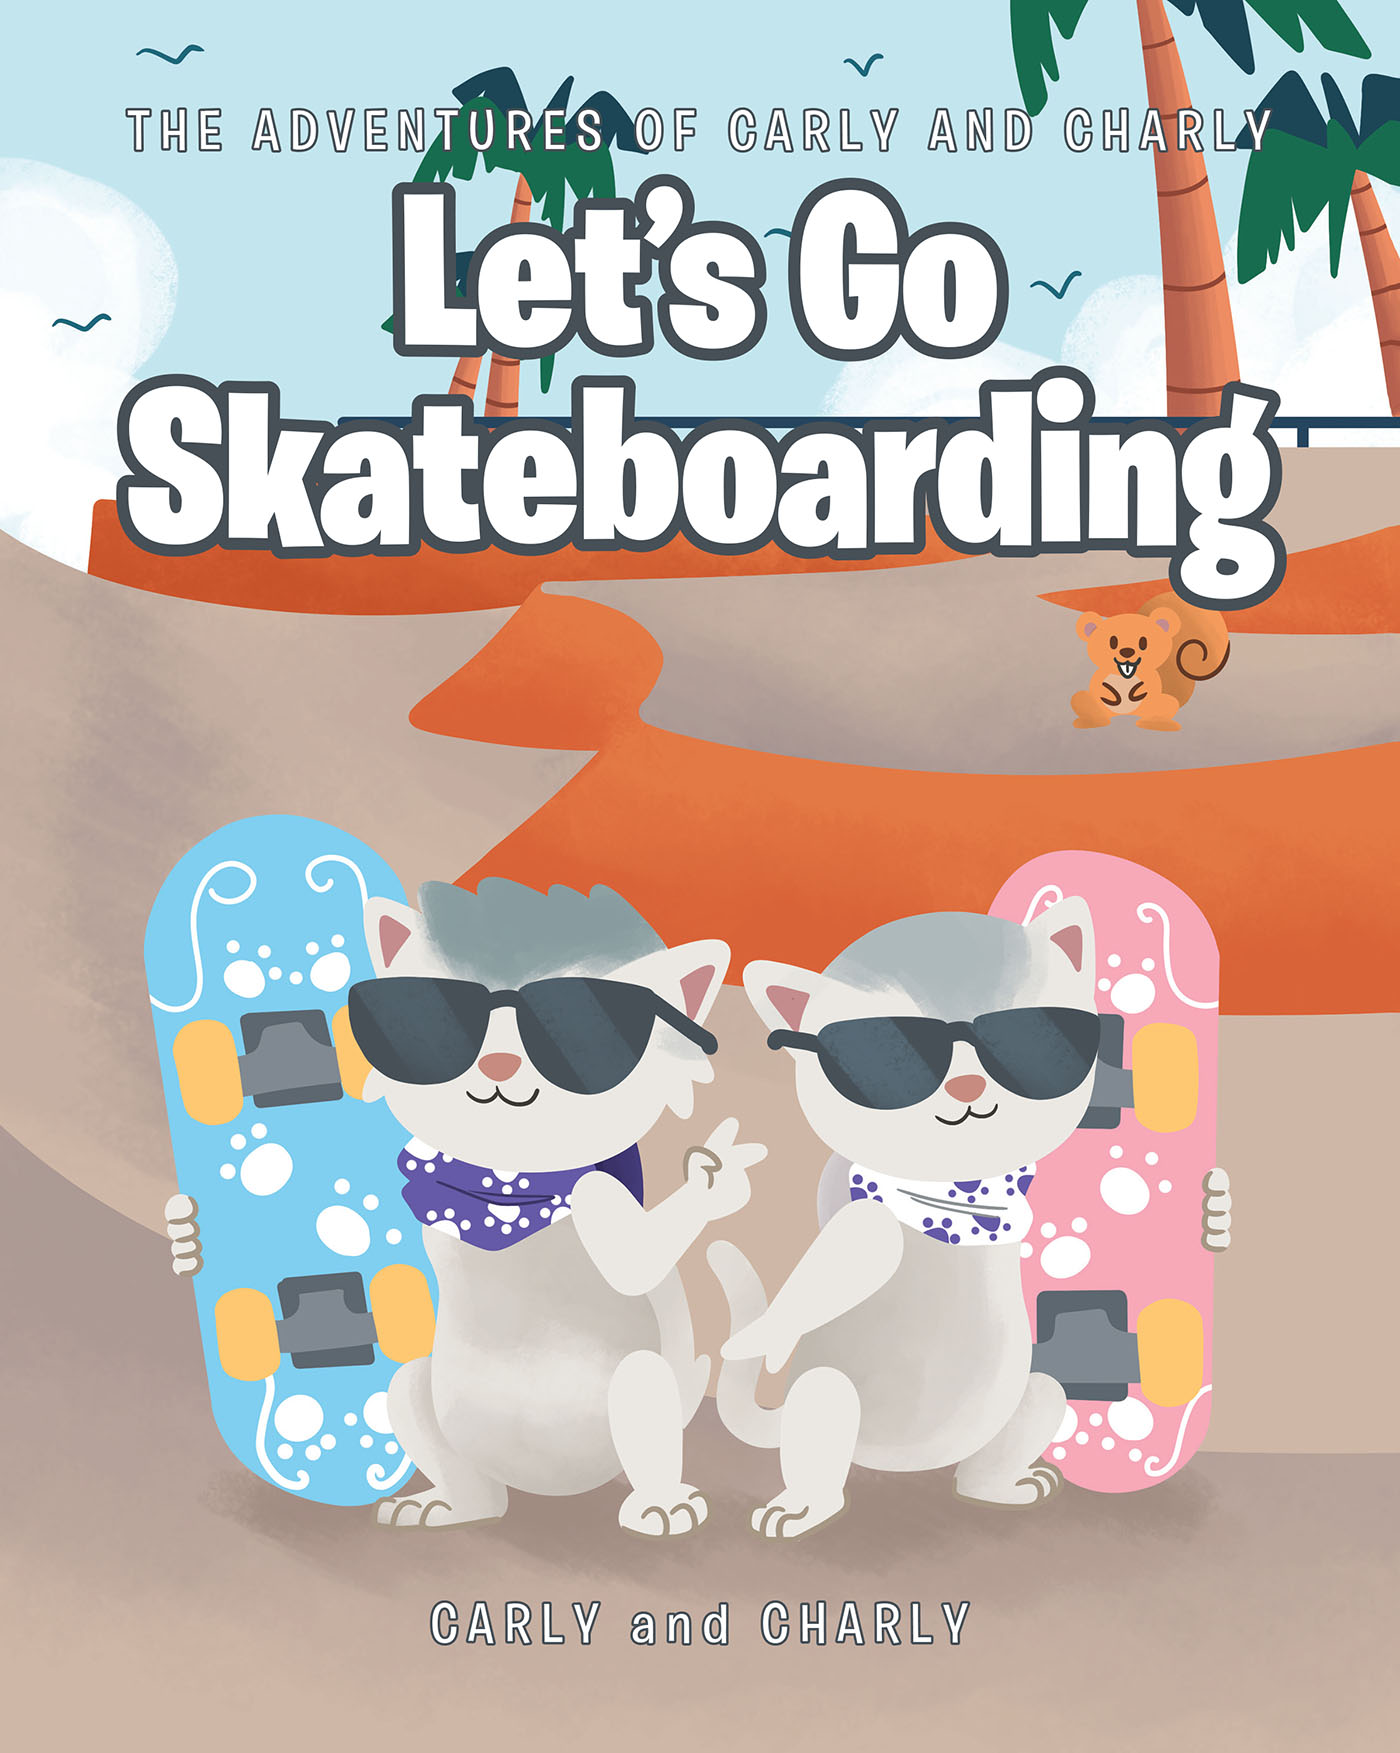 Carly and Charly’s New Book, "Let's Go Skateboarding," is the Enthralling Story of the Feline Authors as They Set Their Sights on Learning How to Skateboard